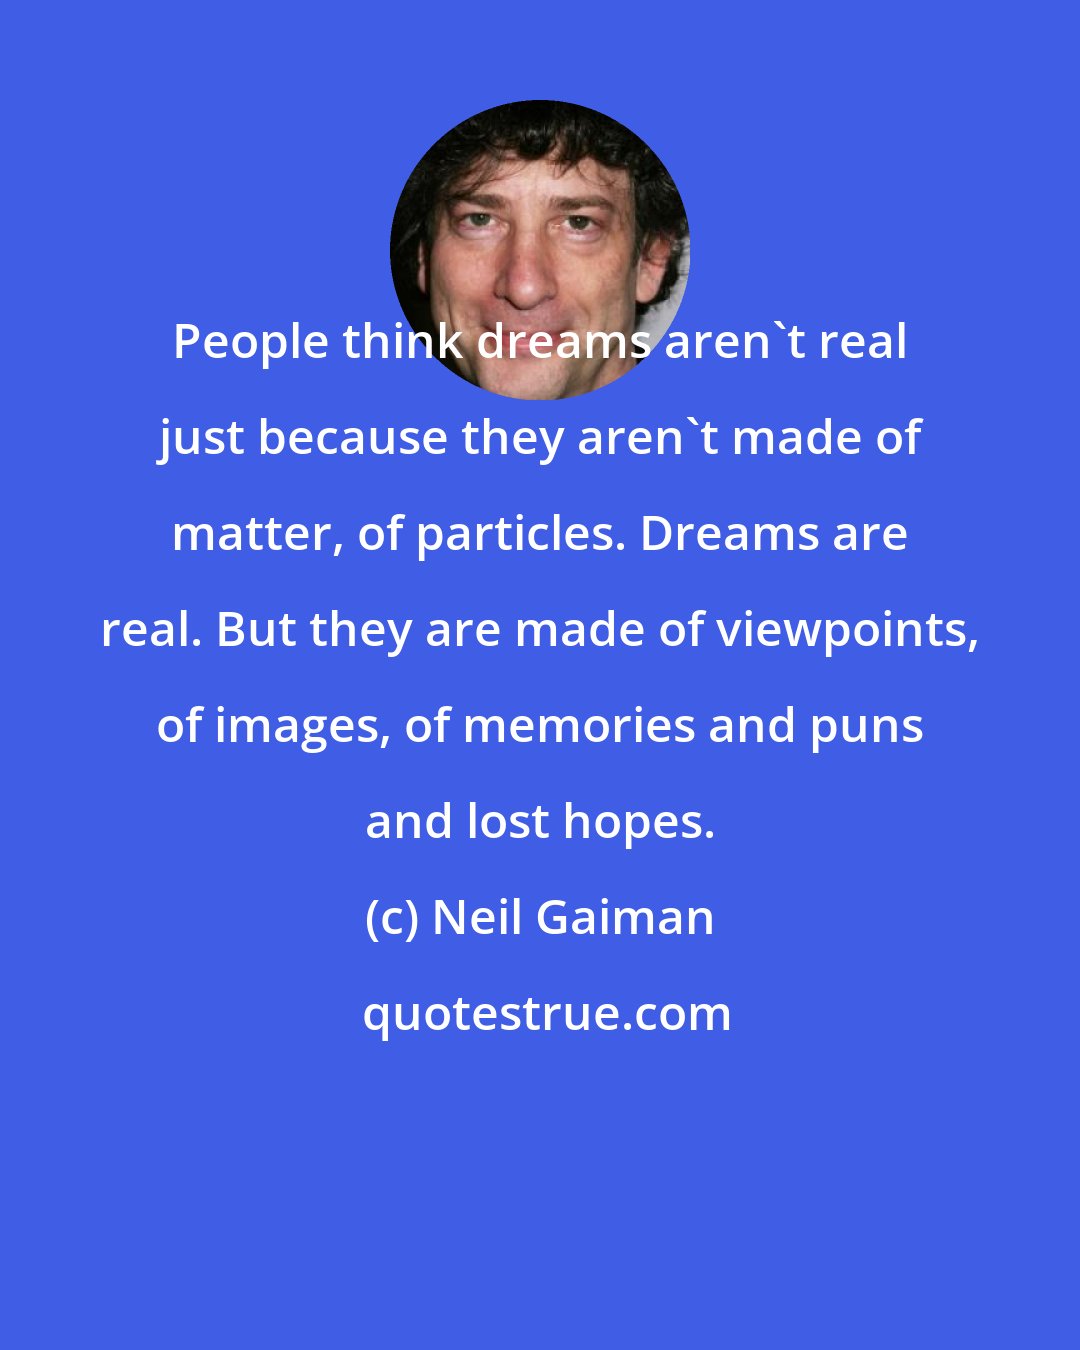 Neil Gaiman: People think dreams aren't real just because they aren't made of matter, of particles. Dreams are real. But they are made of viewpoints, of images, of memories and puns and lost hopes.